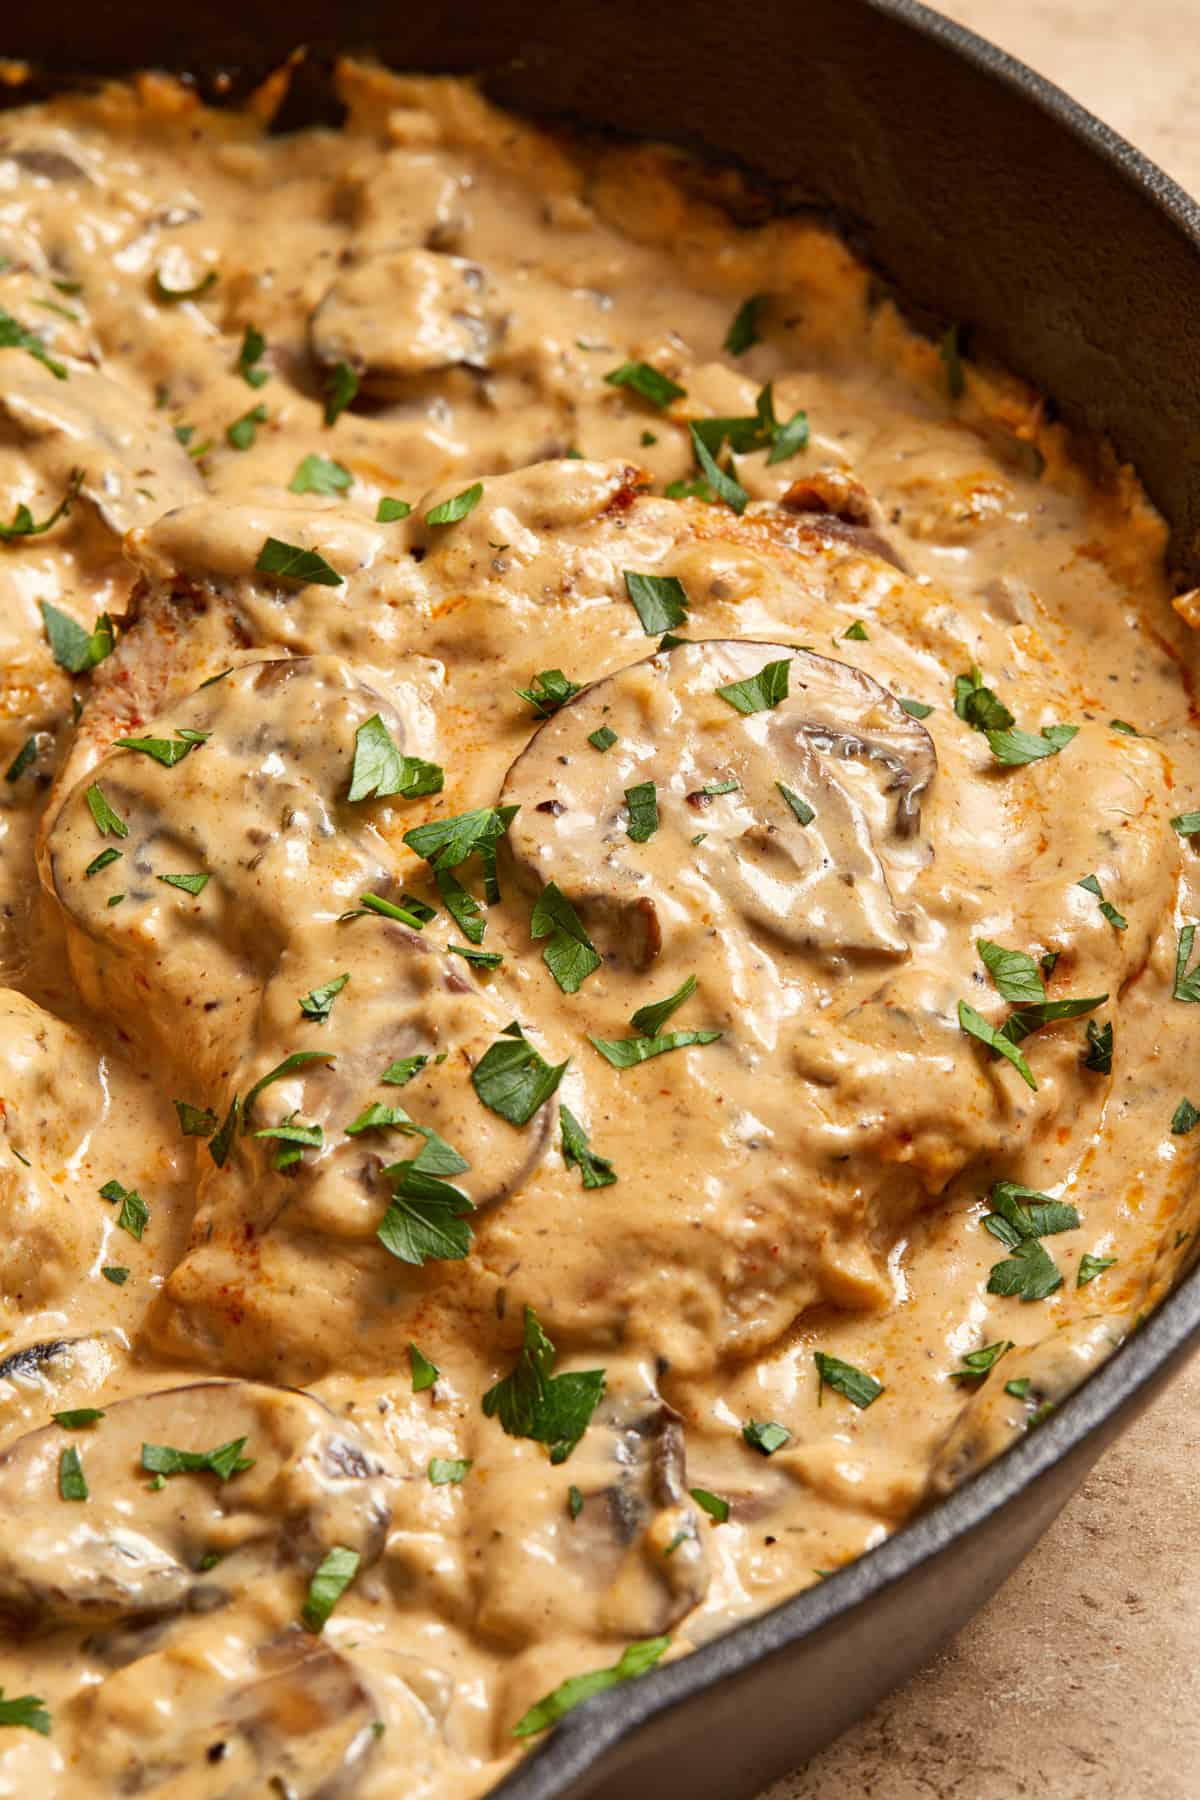 Skillet with cream of mushroom pork chops with parsley on top.